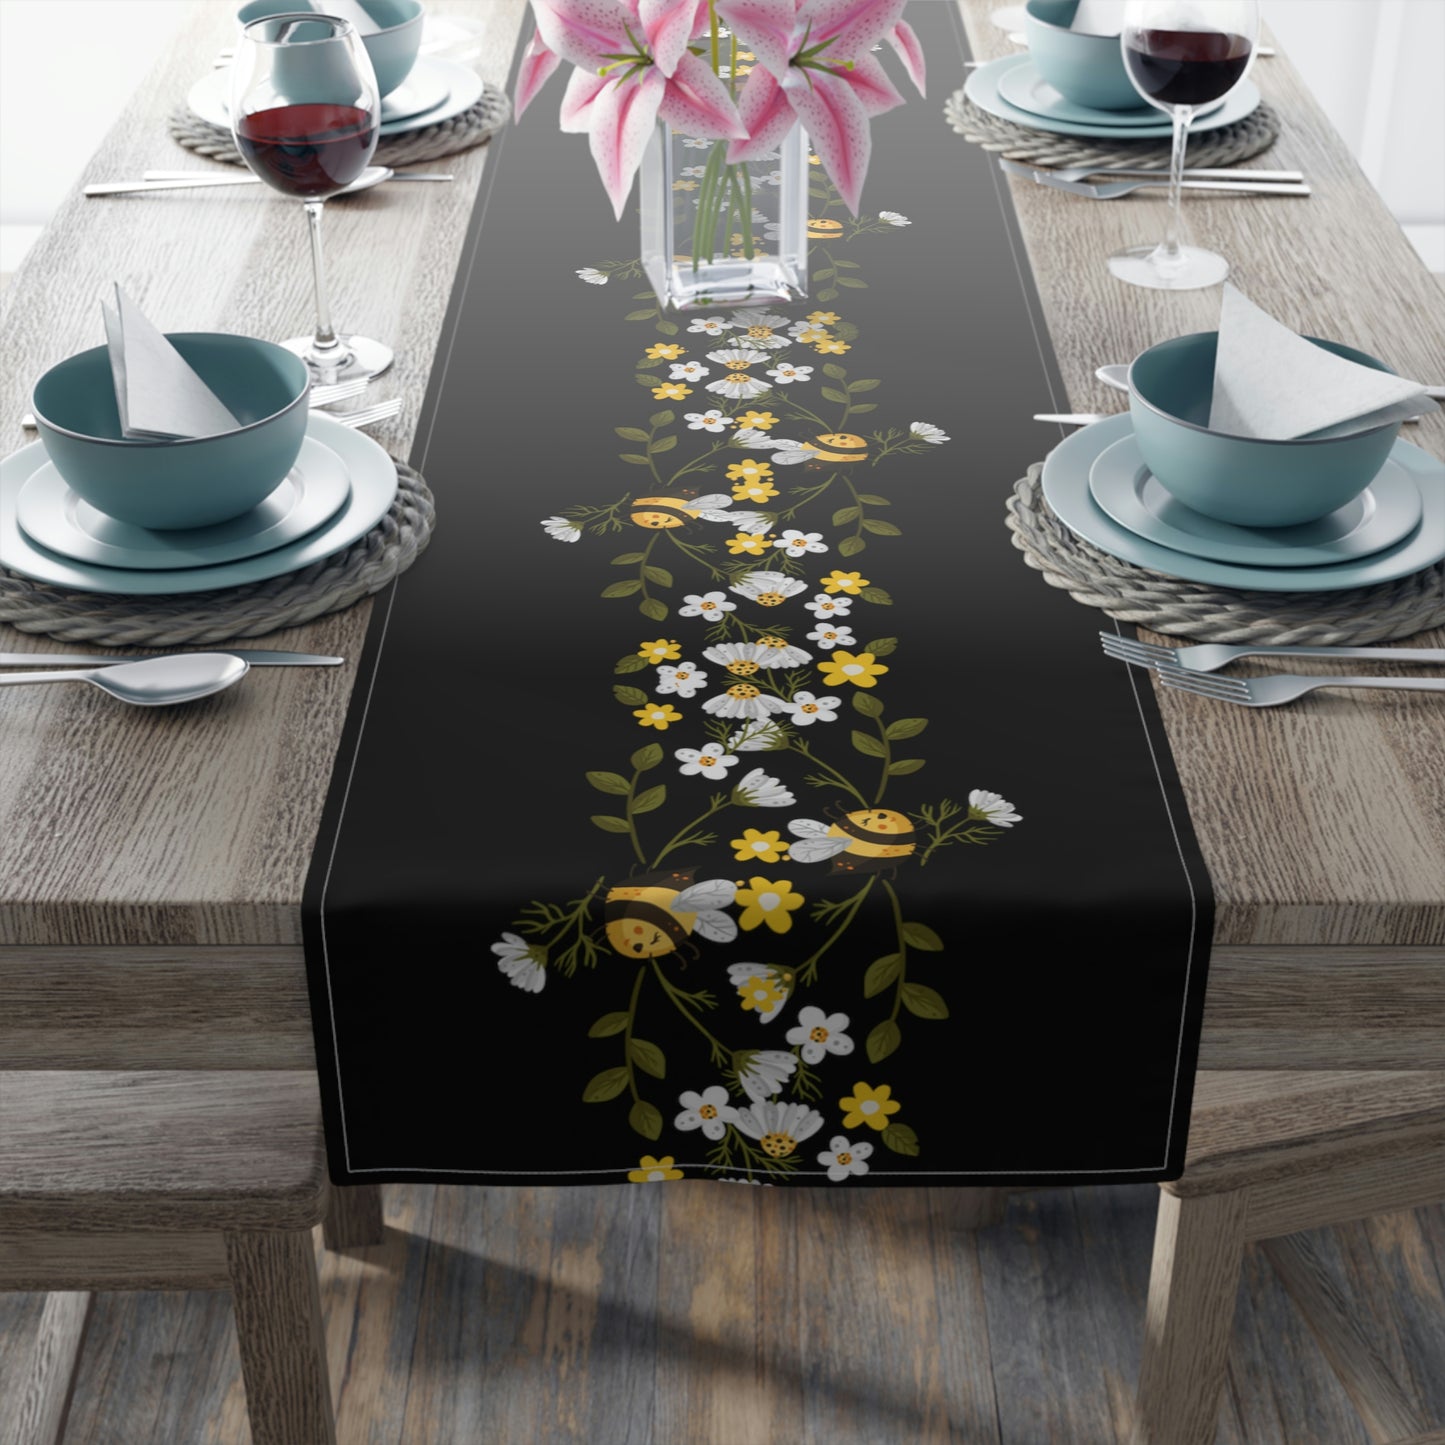 honey bee and daisy table runner in black and yellow for spring or summer decor